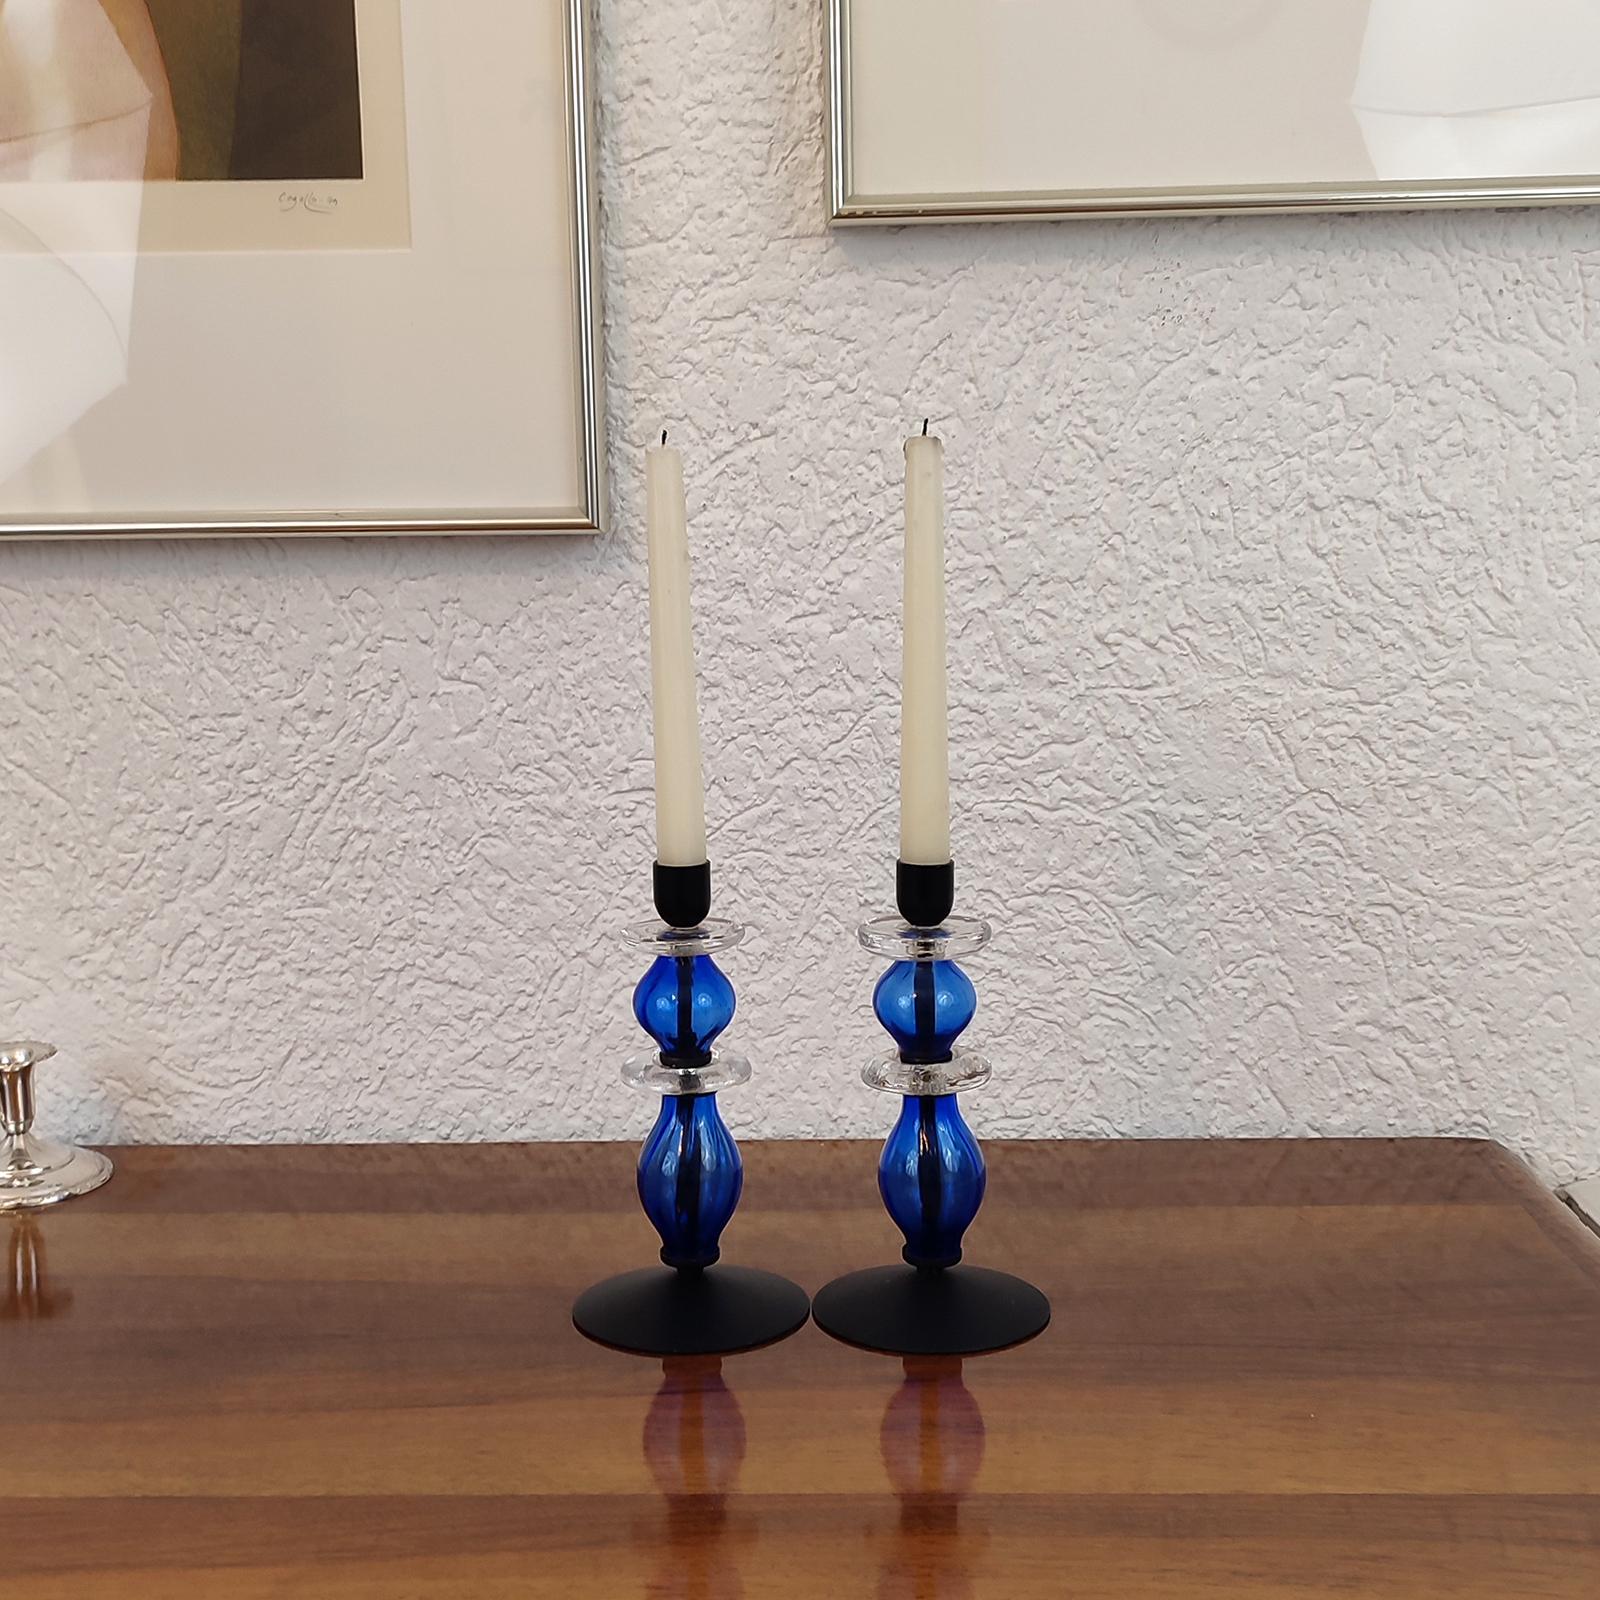 Mid-Century Modern, Swedish, pair of candle holders, black painted metal and blue art glass.
Beautiful pair of candle holders, designed by Erik Hoglund for Boda, Sweden. Base and top made of black painted metal. Body made of ribbed blue art glass